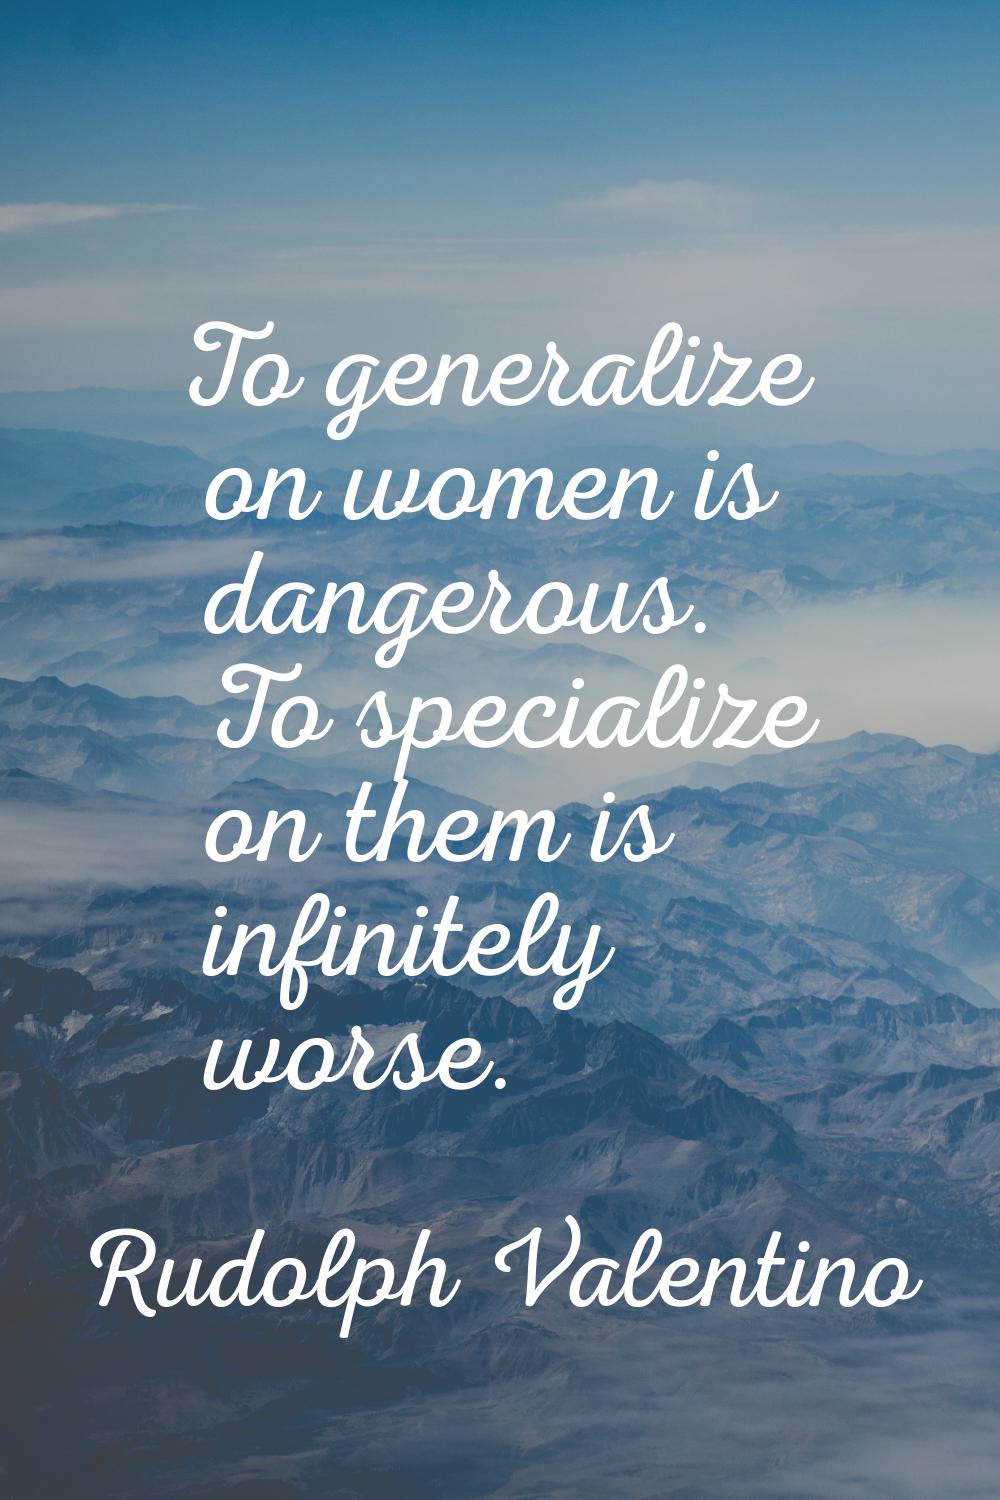 To generalize on women is dangerous. To specialize on them is infinitely worse.